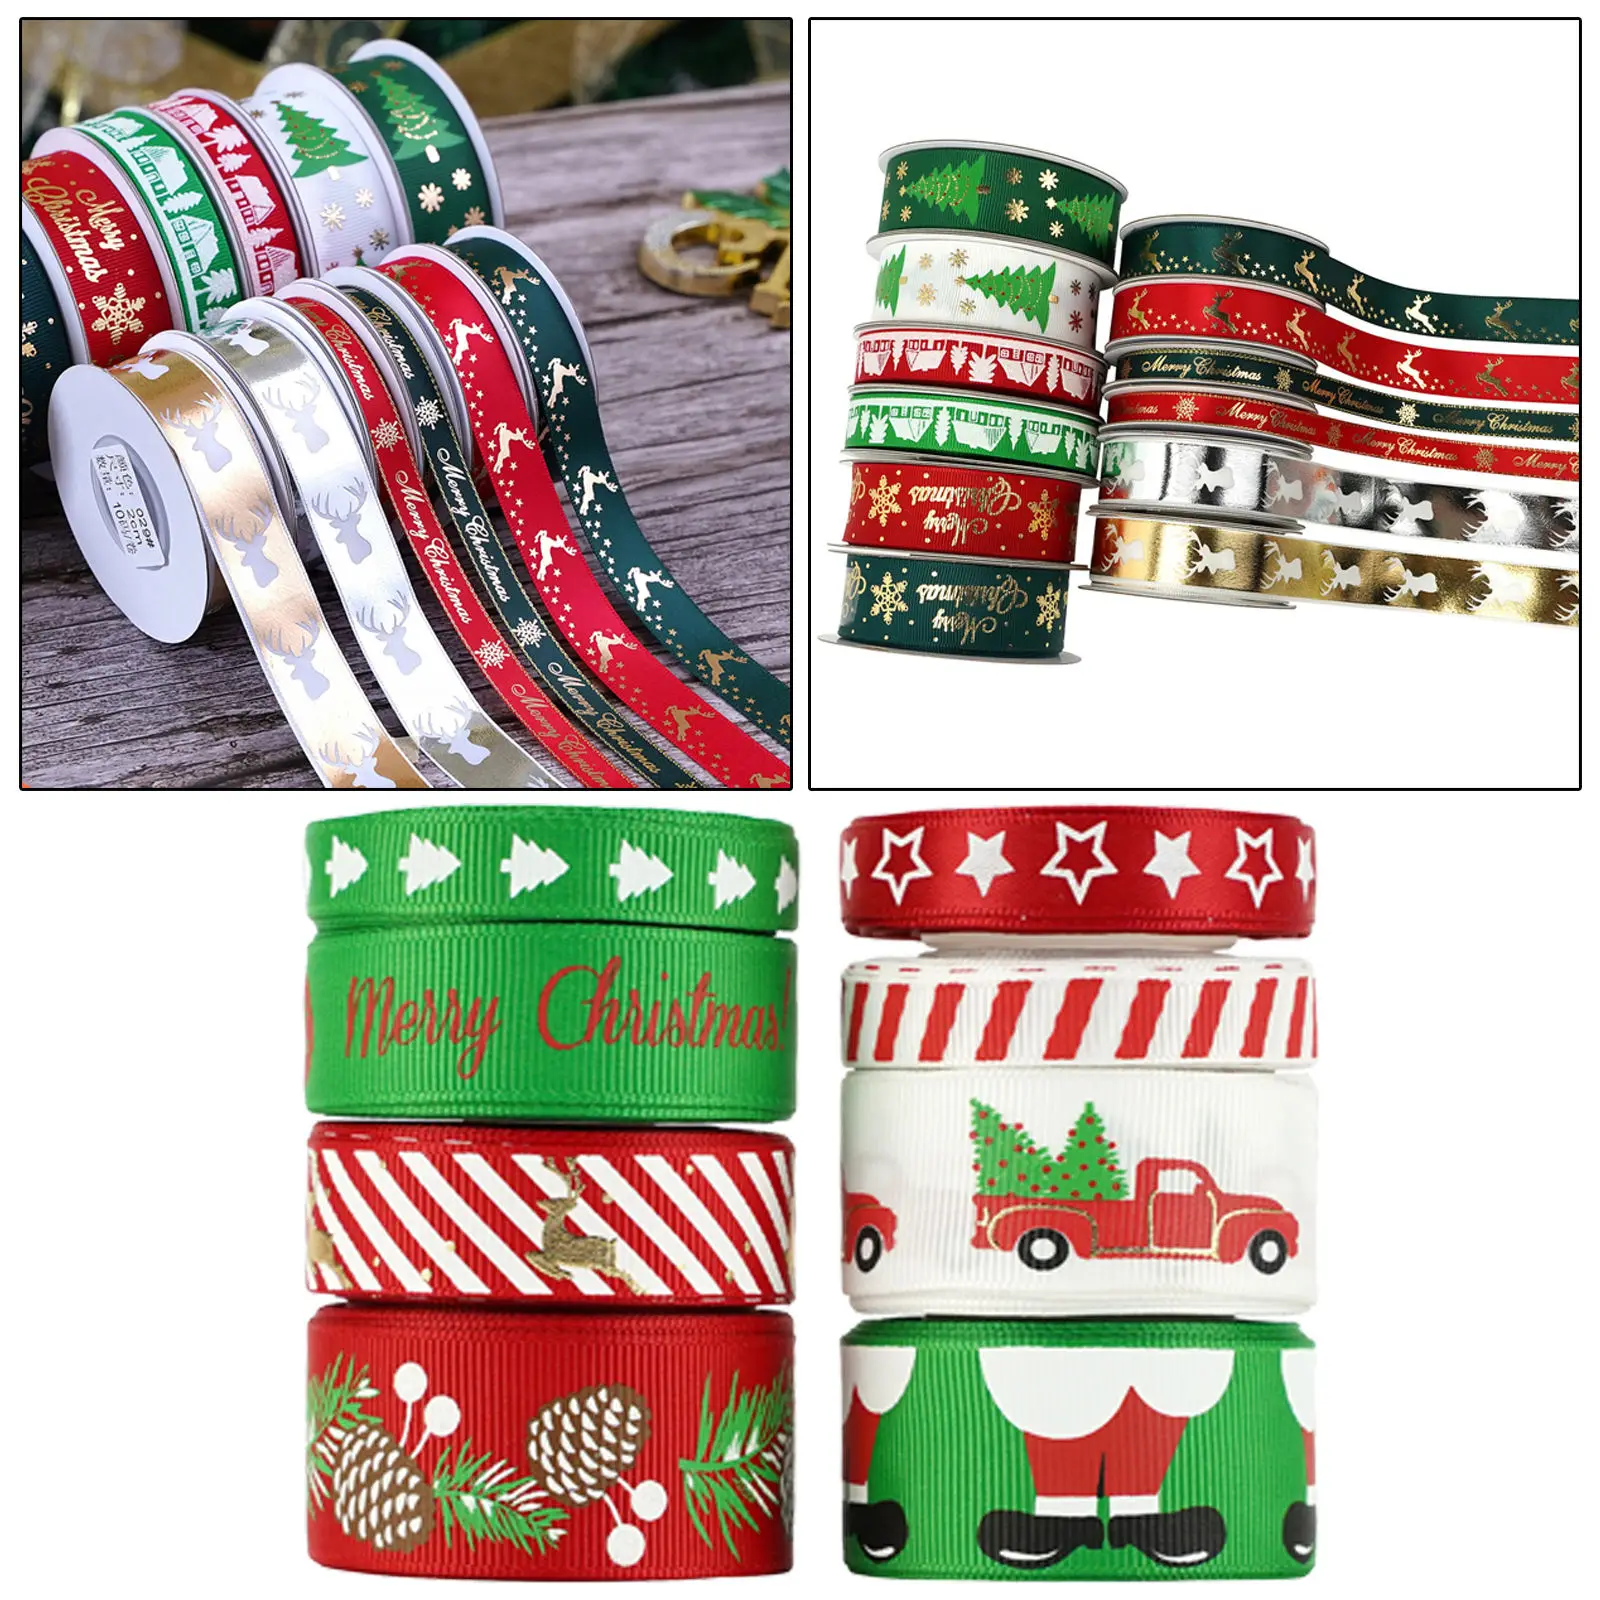 8 Rolls 10mm 16mm 25mm Christmas Ribbon Printed Grosgrain Ribbons for Gift Wrapping Wedding Decoration Hair Bows DIY